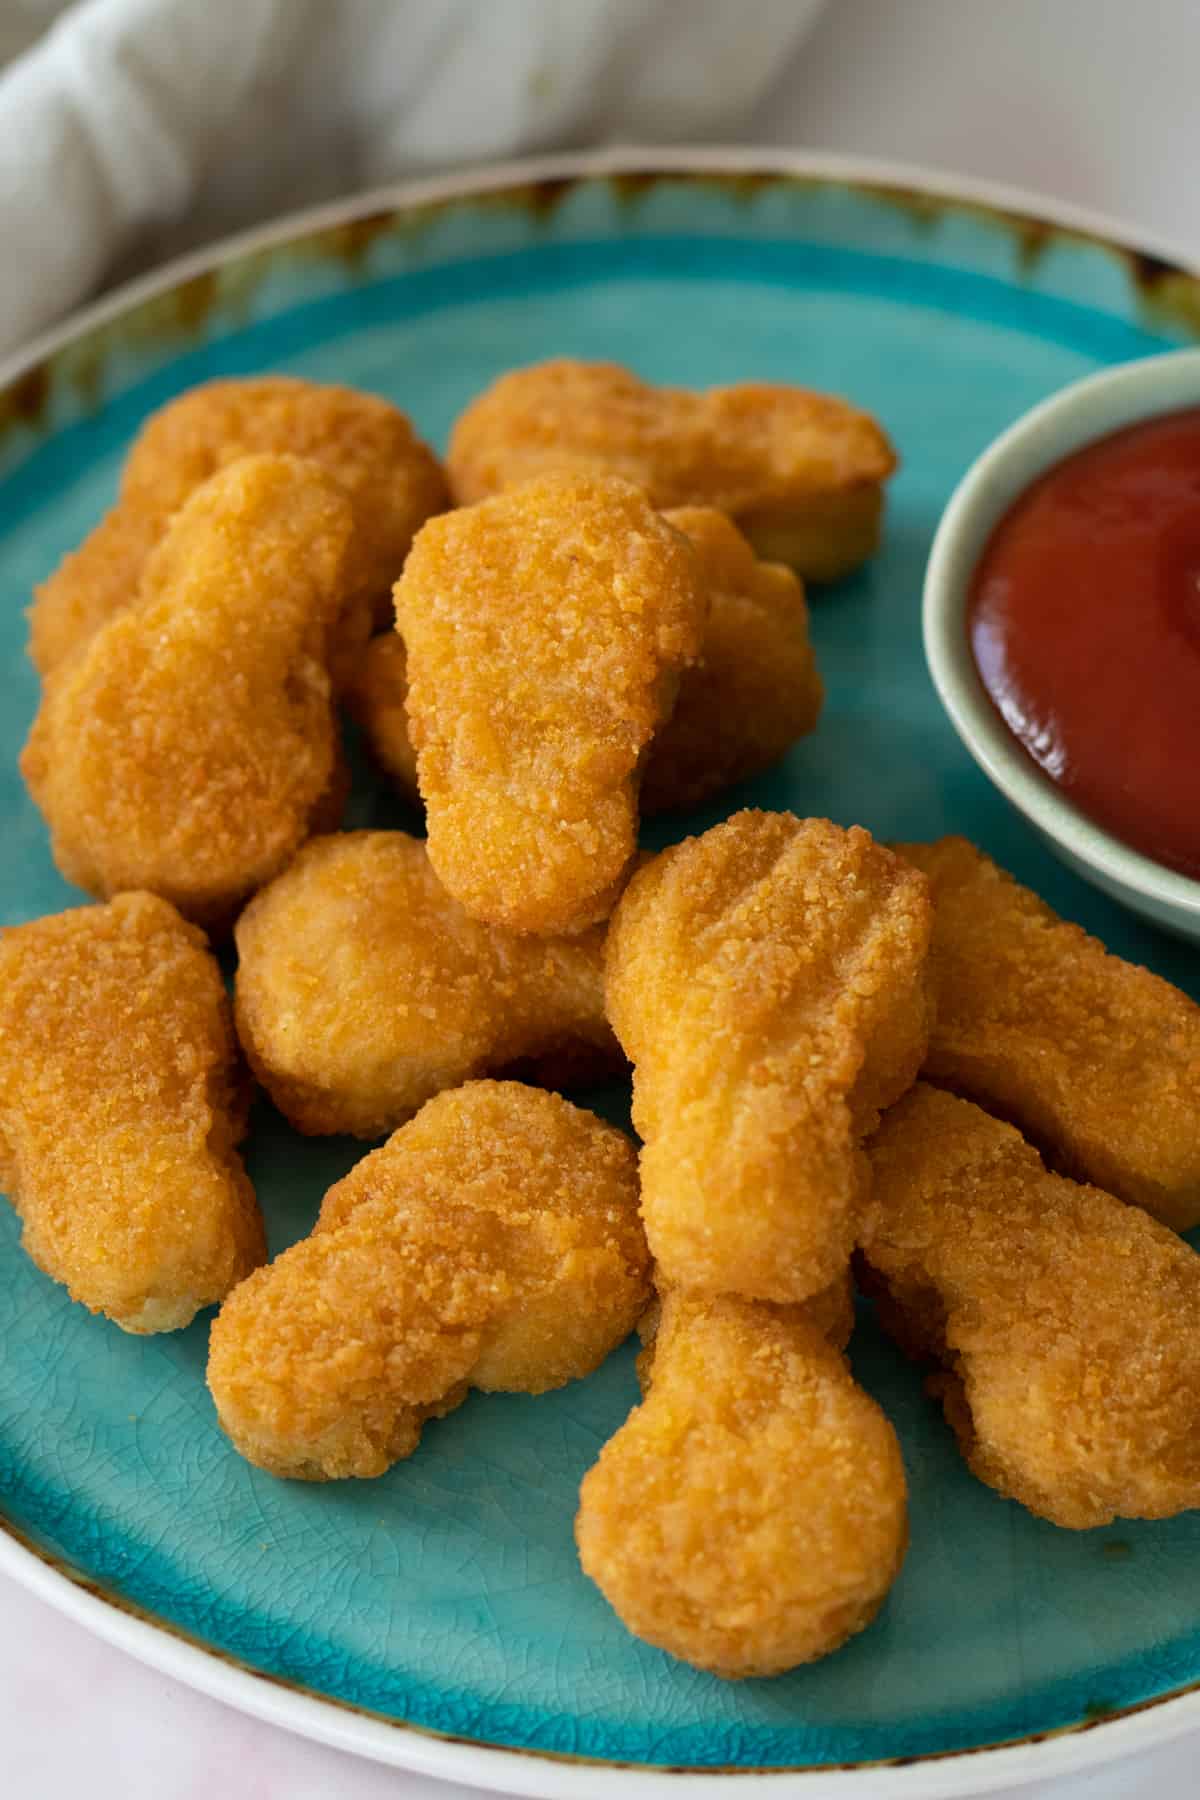 chicken nuggets on a plate with a bowl of ketchup.